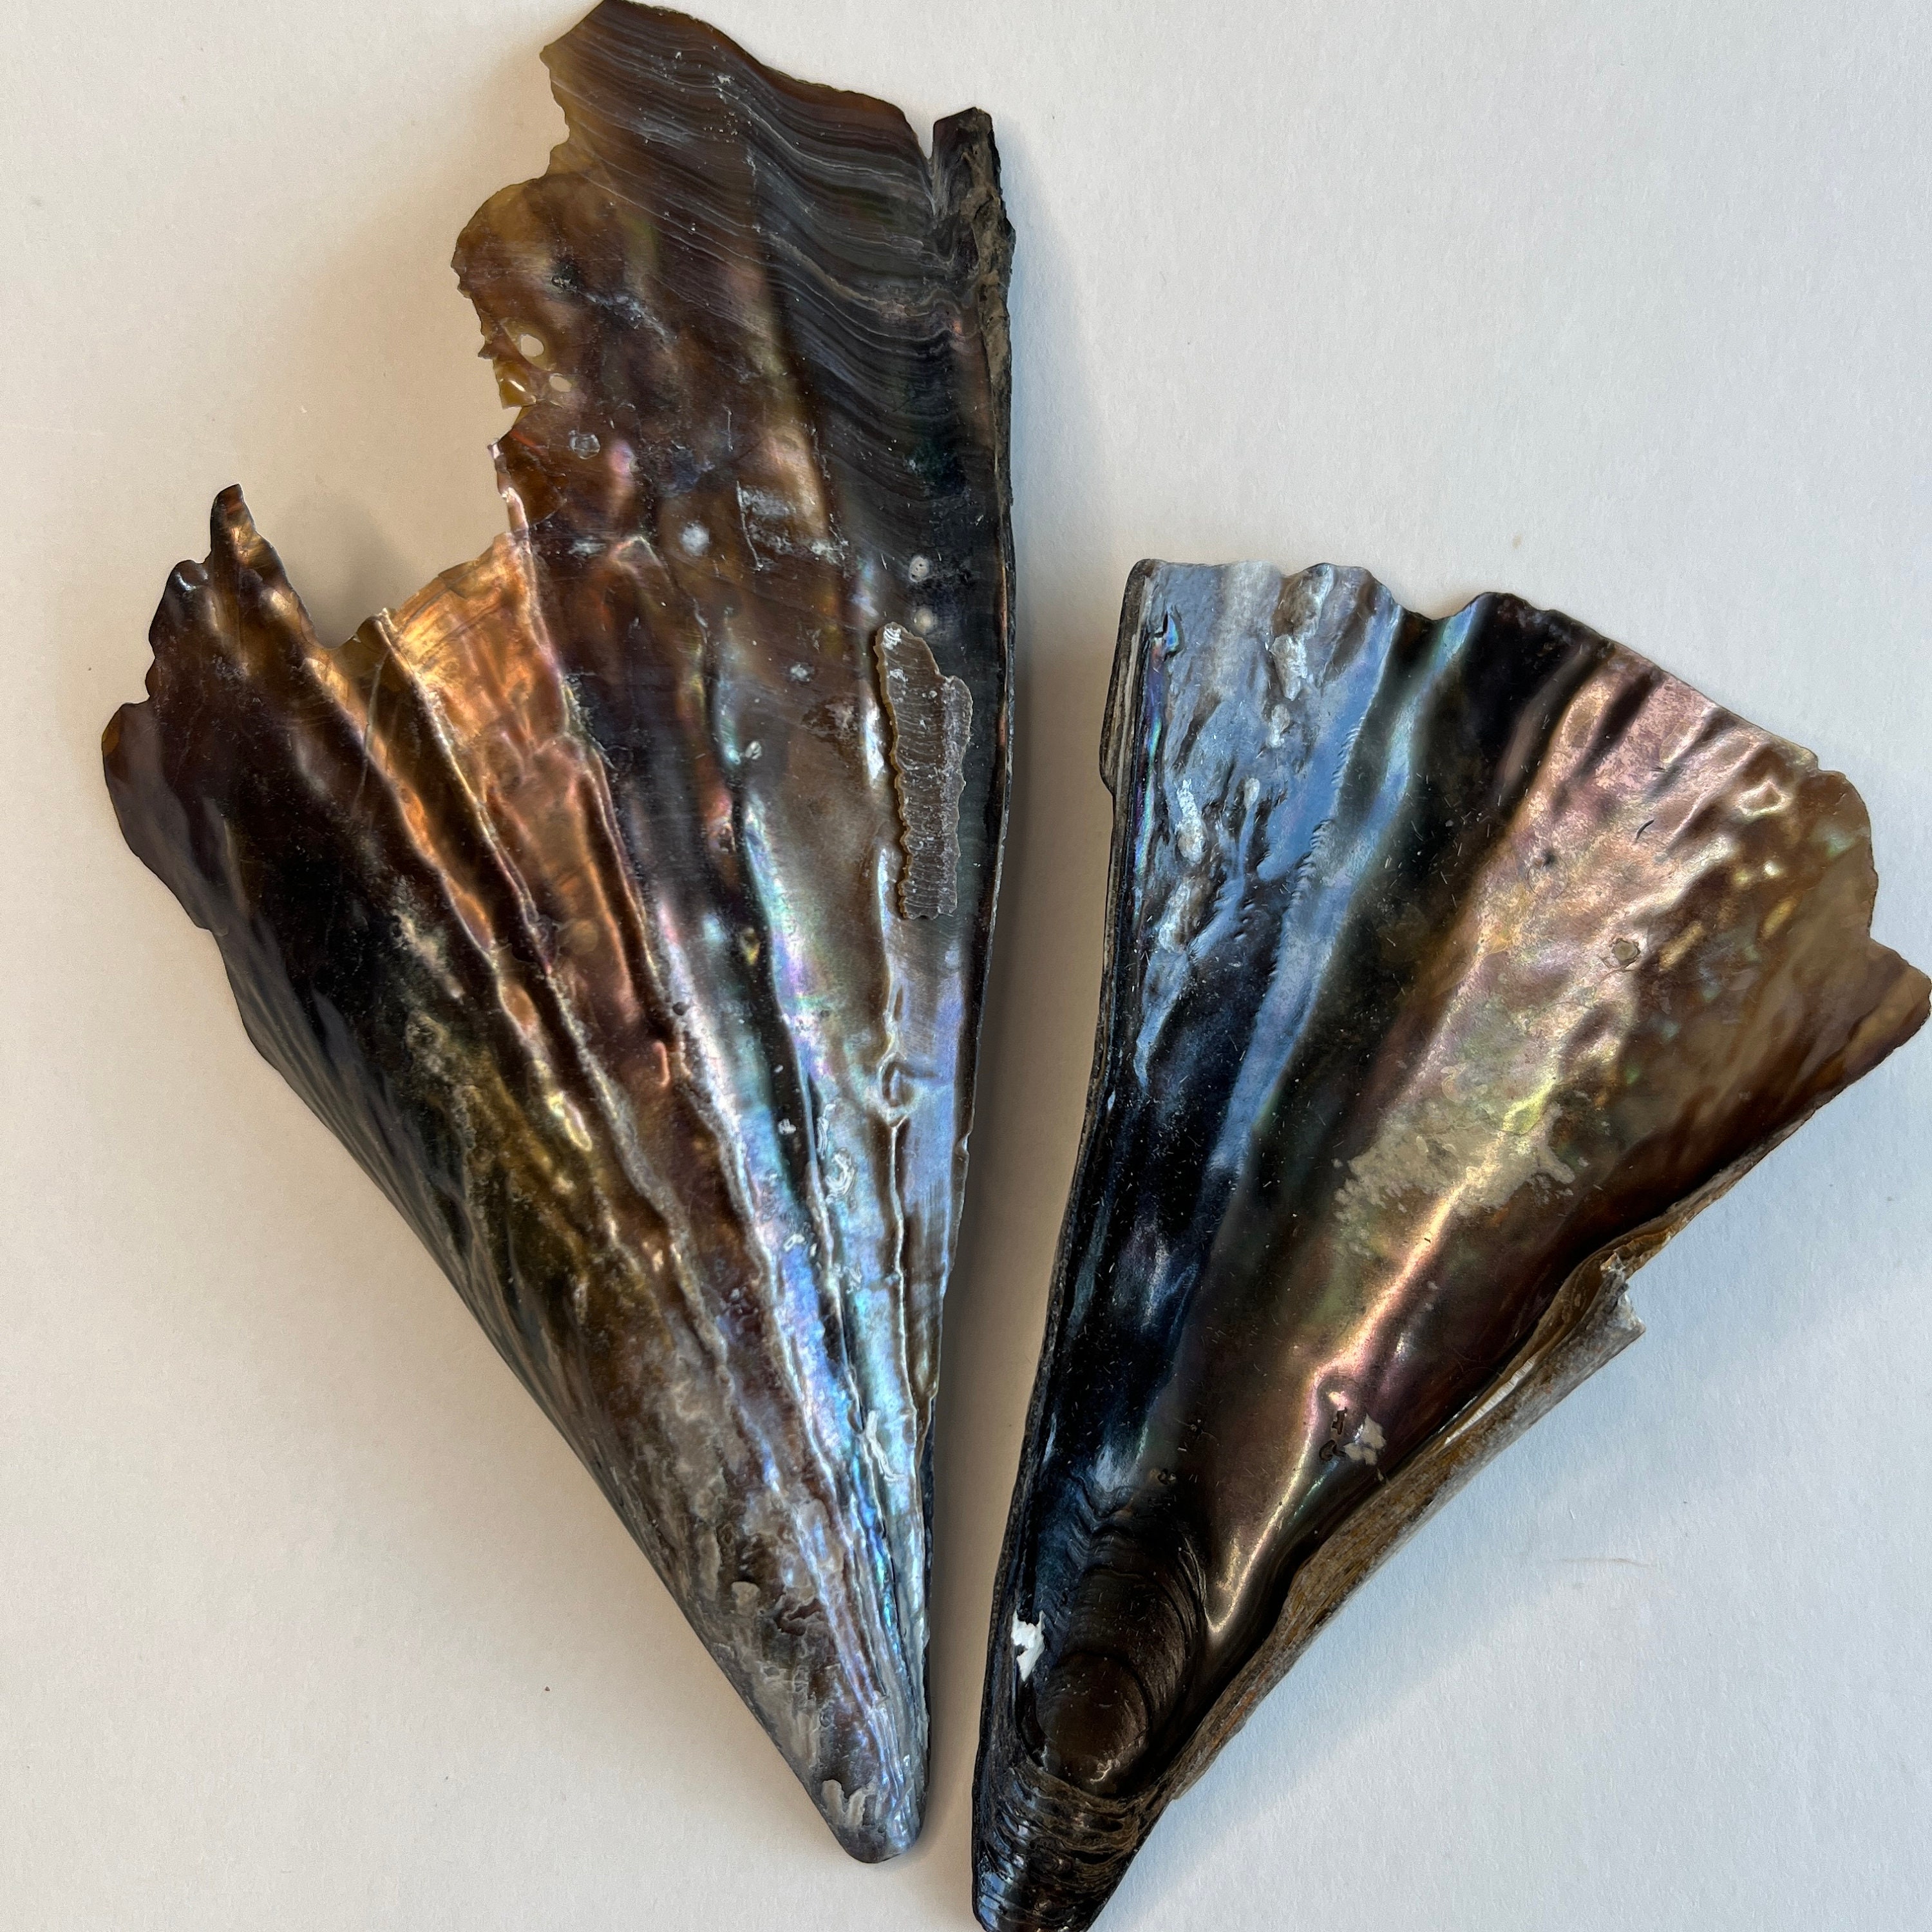 Jekyll Island - #WildlifeWednesday: Rigid pen shells are also called stiff pen  shells. The insides of these fan-shaped shells are smooth and shiny, like  mother-of-pearl, while the outside is covered with rough